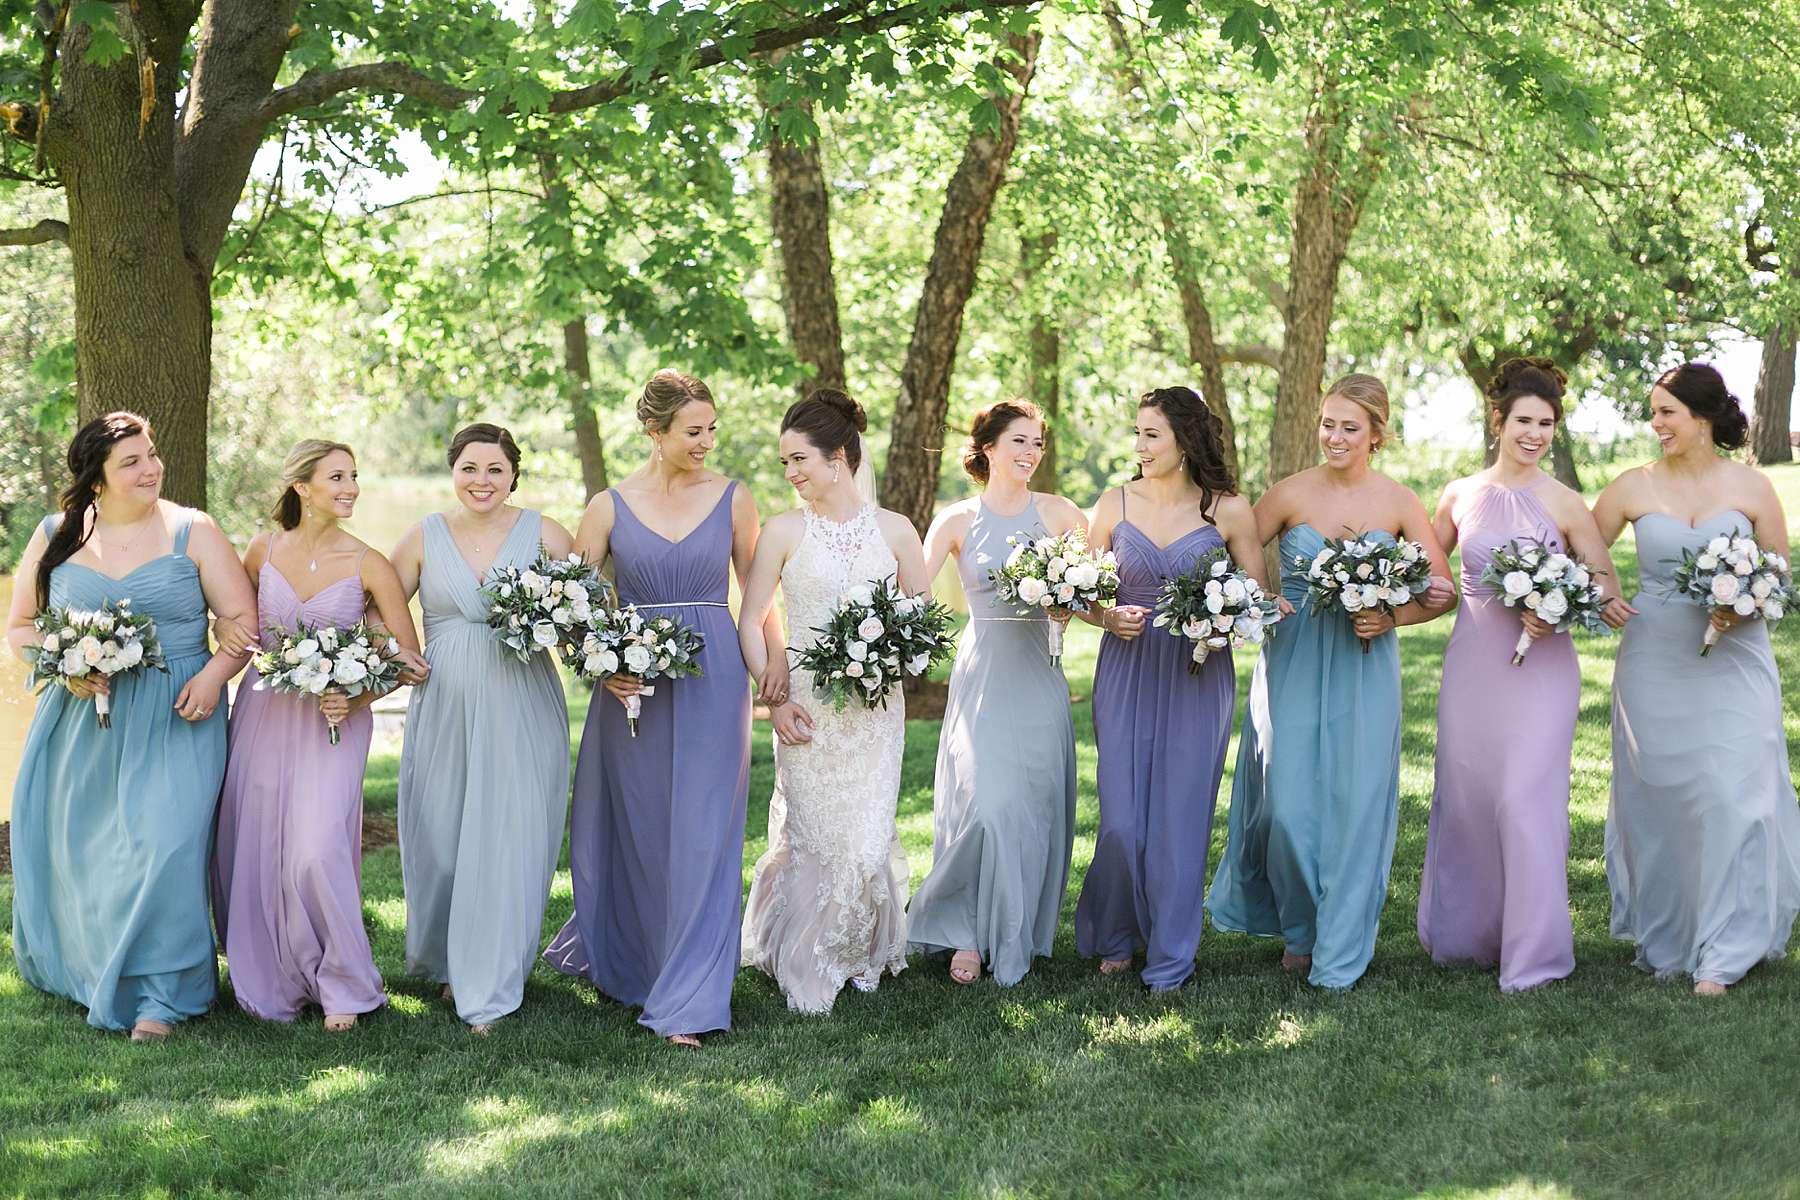 bridal party portrait, rustic romantic wedding at the landing 1841, photo by laurelyn savannah photography